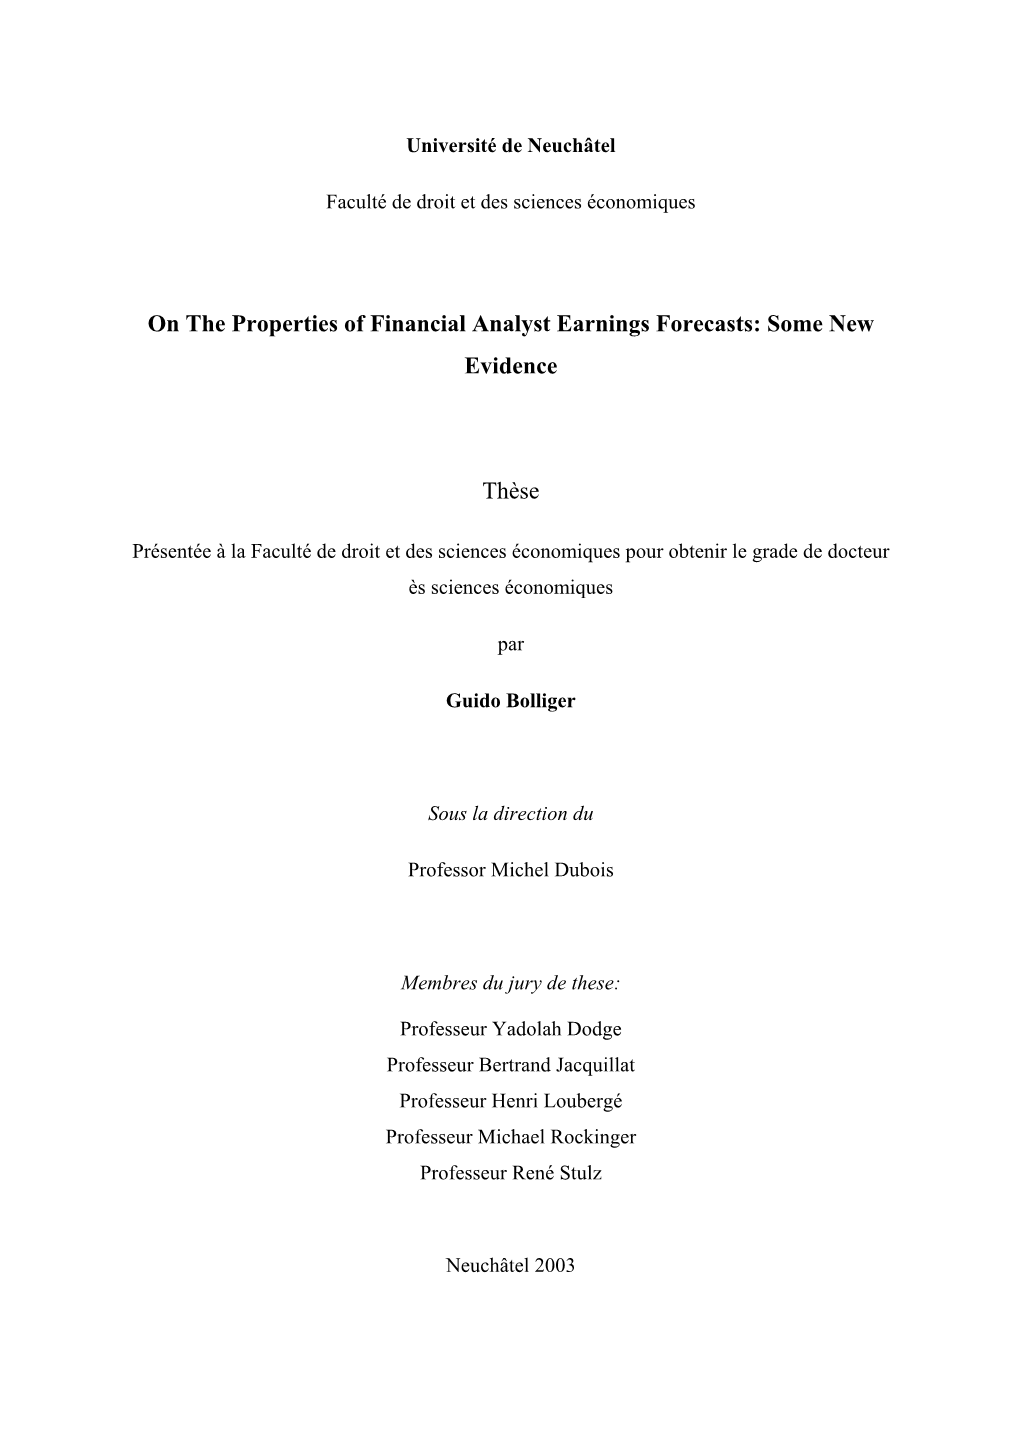 On the Properties of Financial Analyst Earnings Forecasts: Some New Evidence